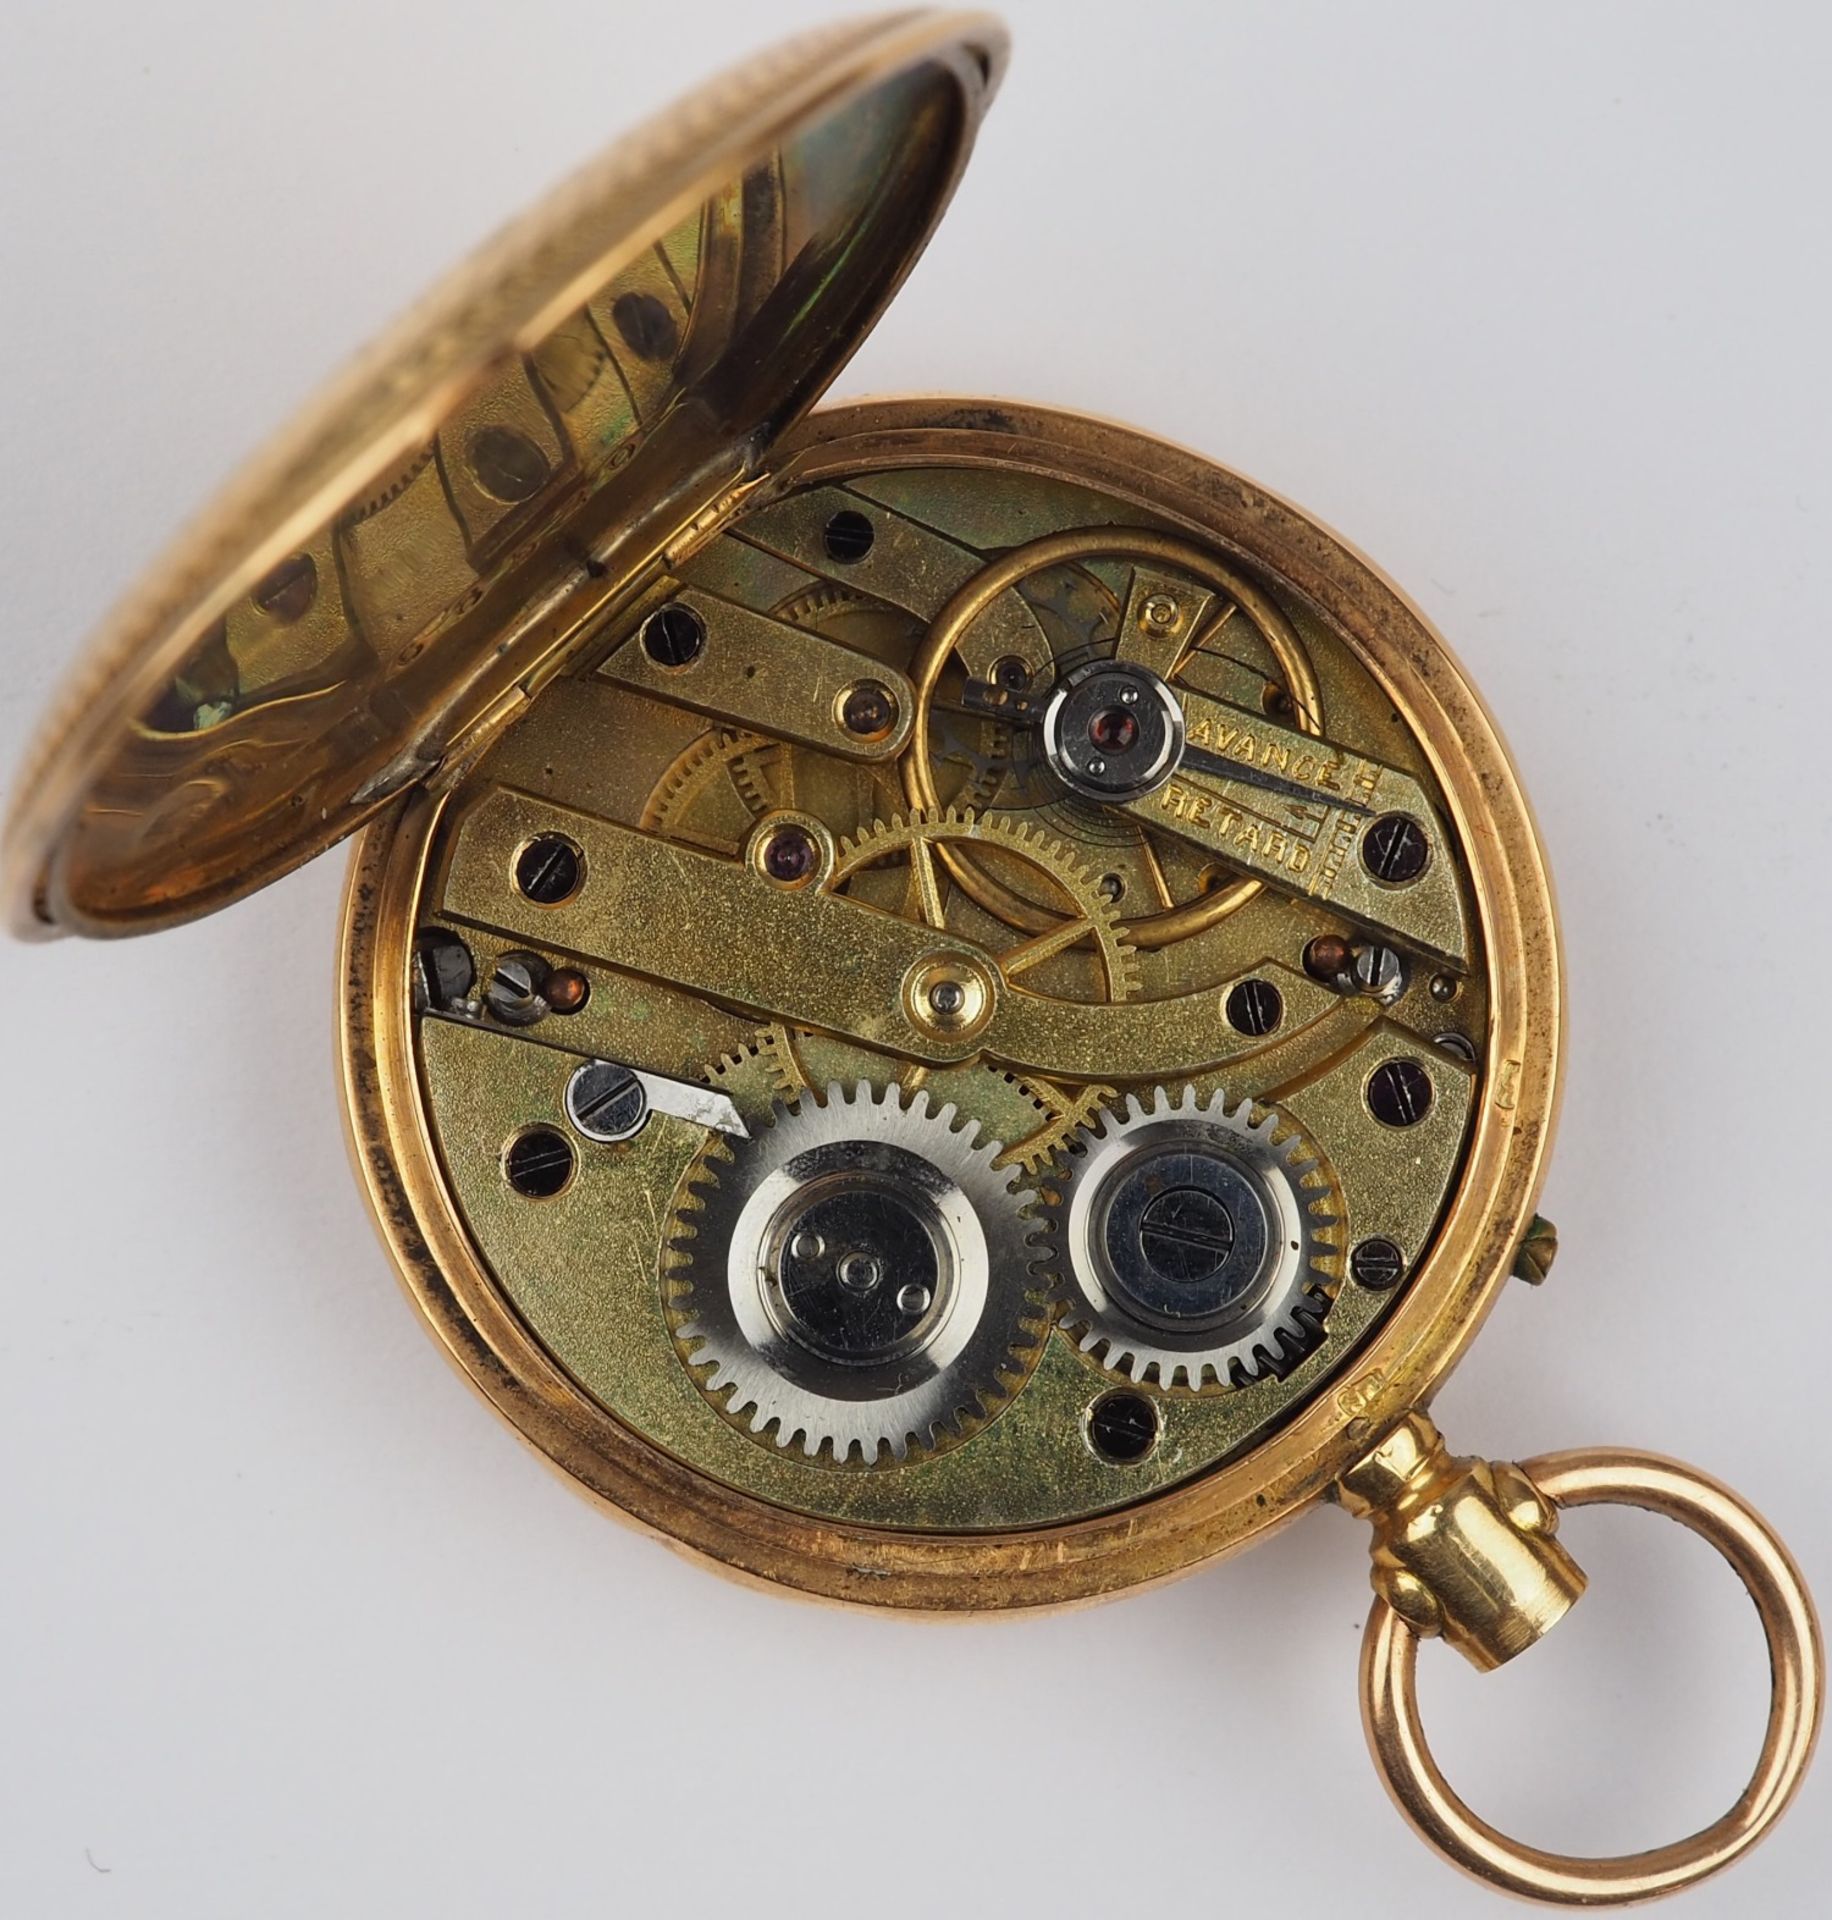 Lady's pocket watch in gold case around 1900 - Image 3 of 4